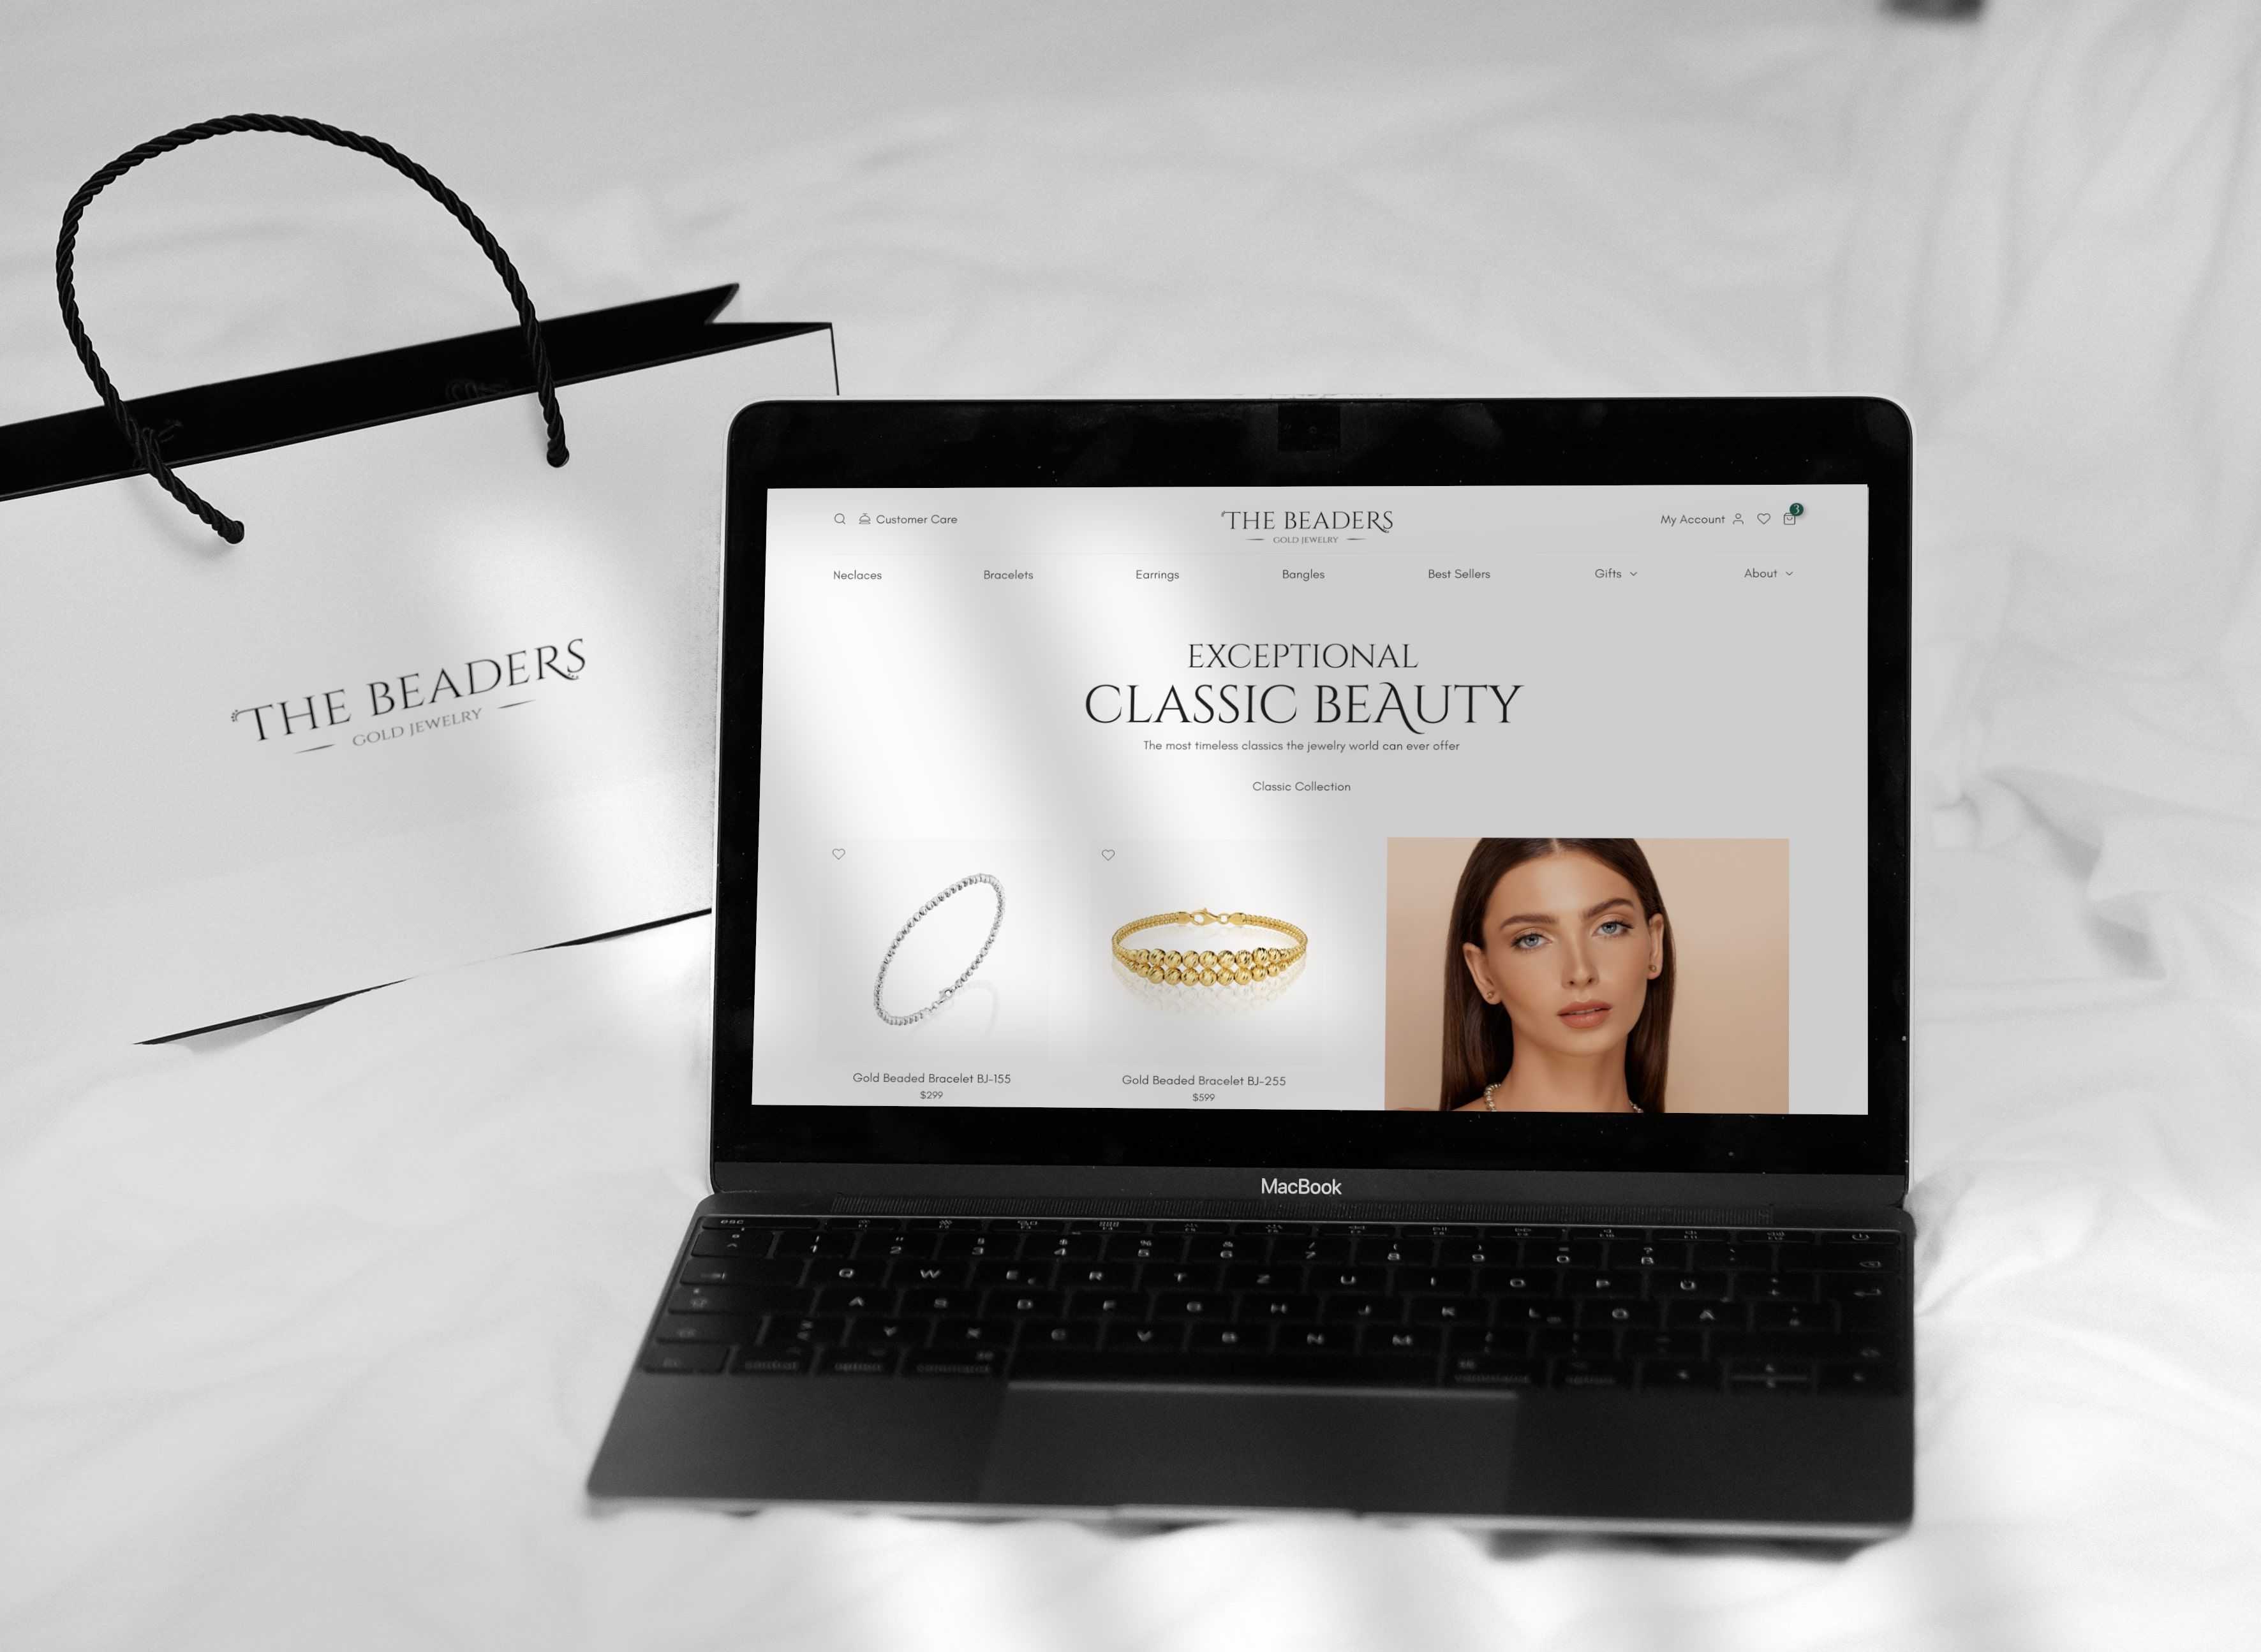 Product Bag and classic beauty products opened on Macbook